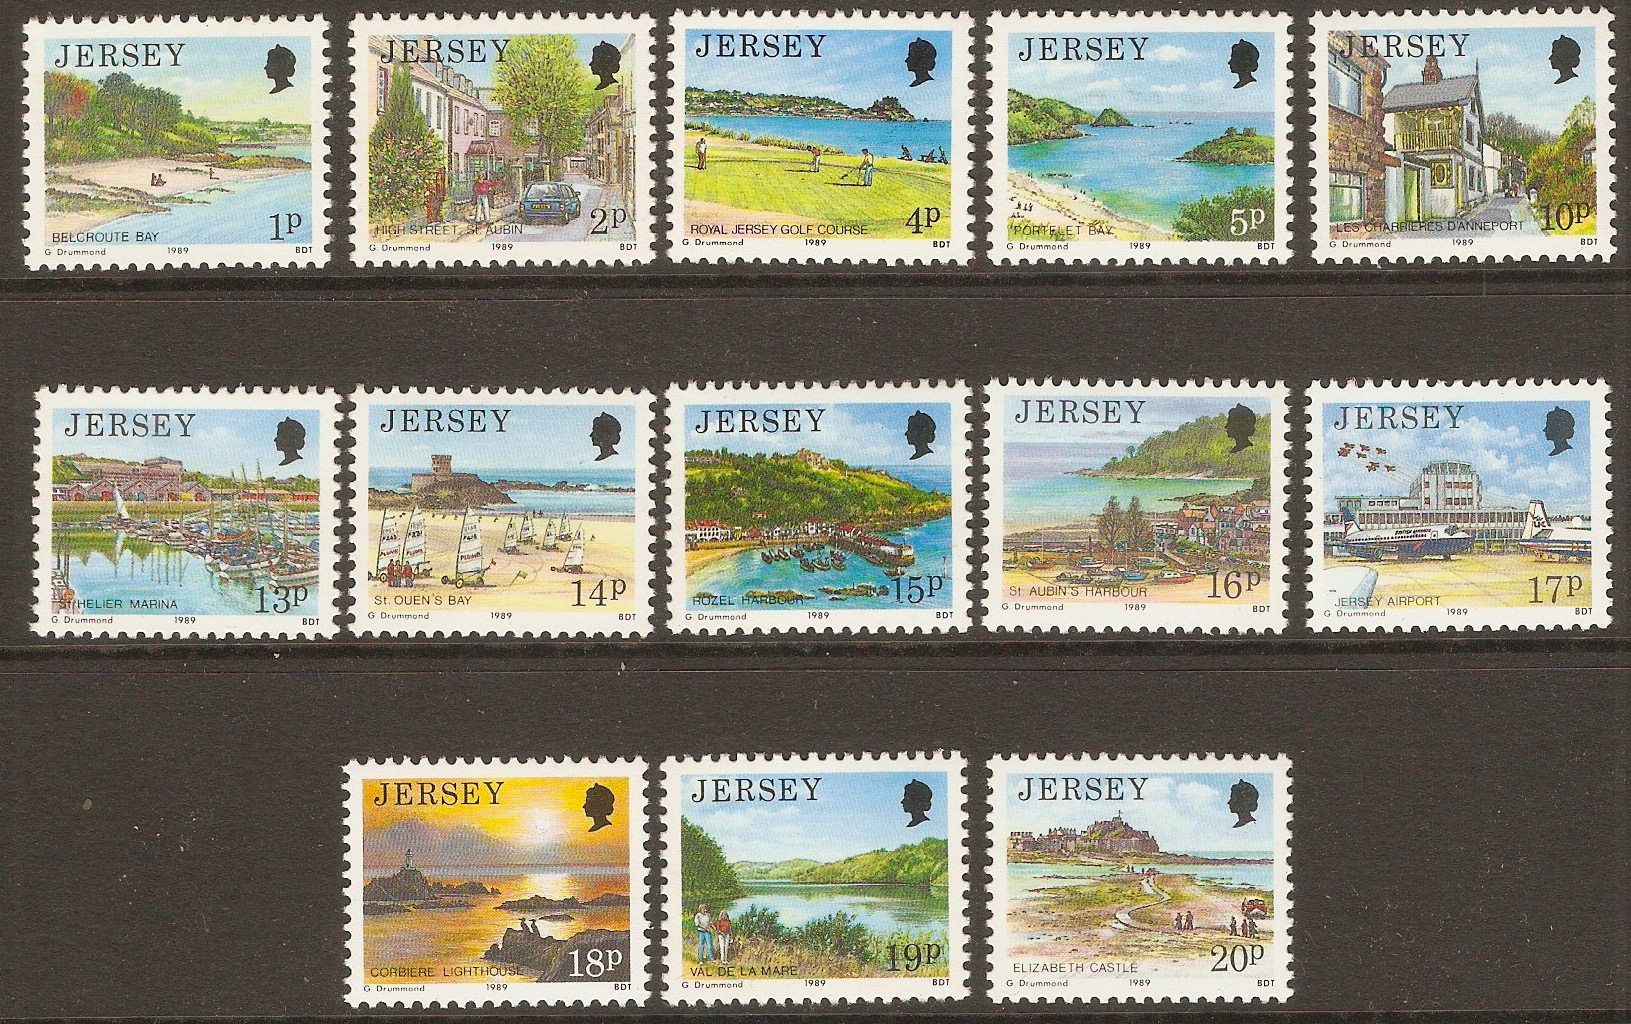 Jersey 1989 Jersey Scenes - Low value sequence. SG468-SG480.